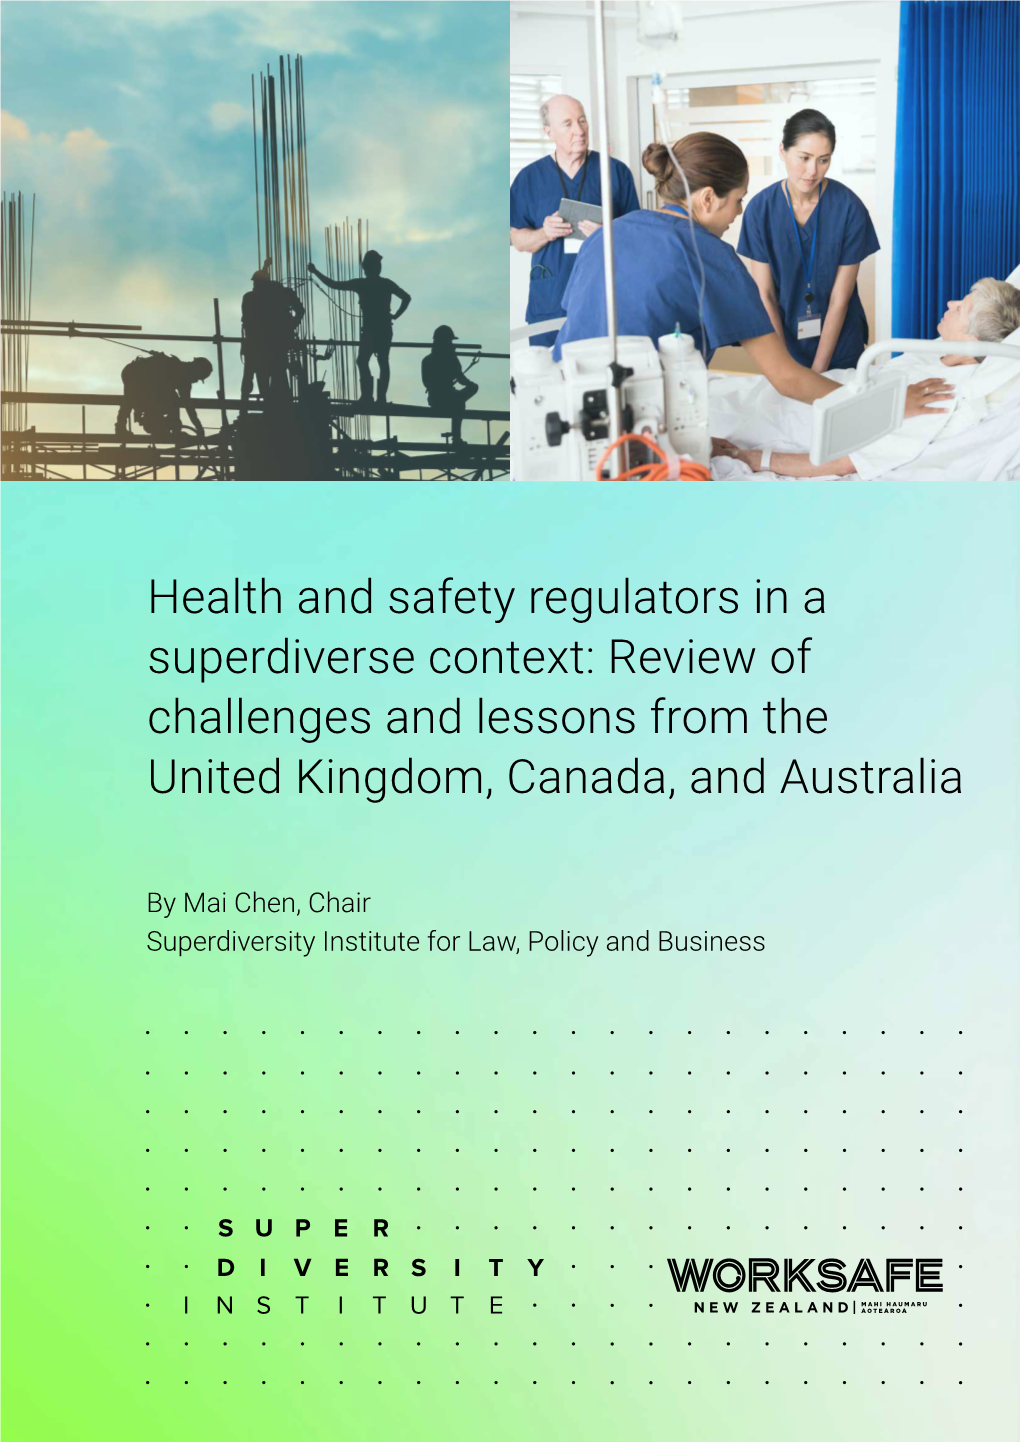 Health and Safety Regulators in a Superdiverse Context: Review of Challenges and Lessons from the United Kingdom, Canada, and Australia